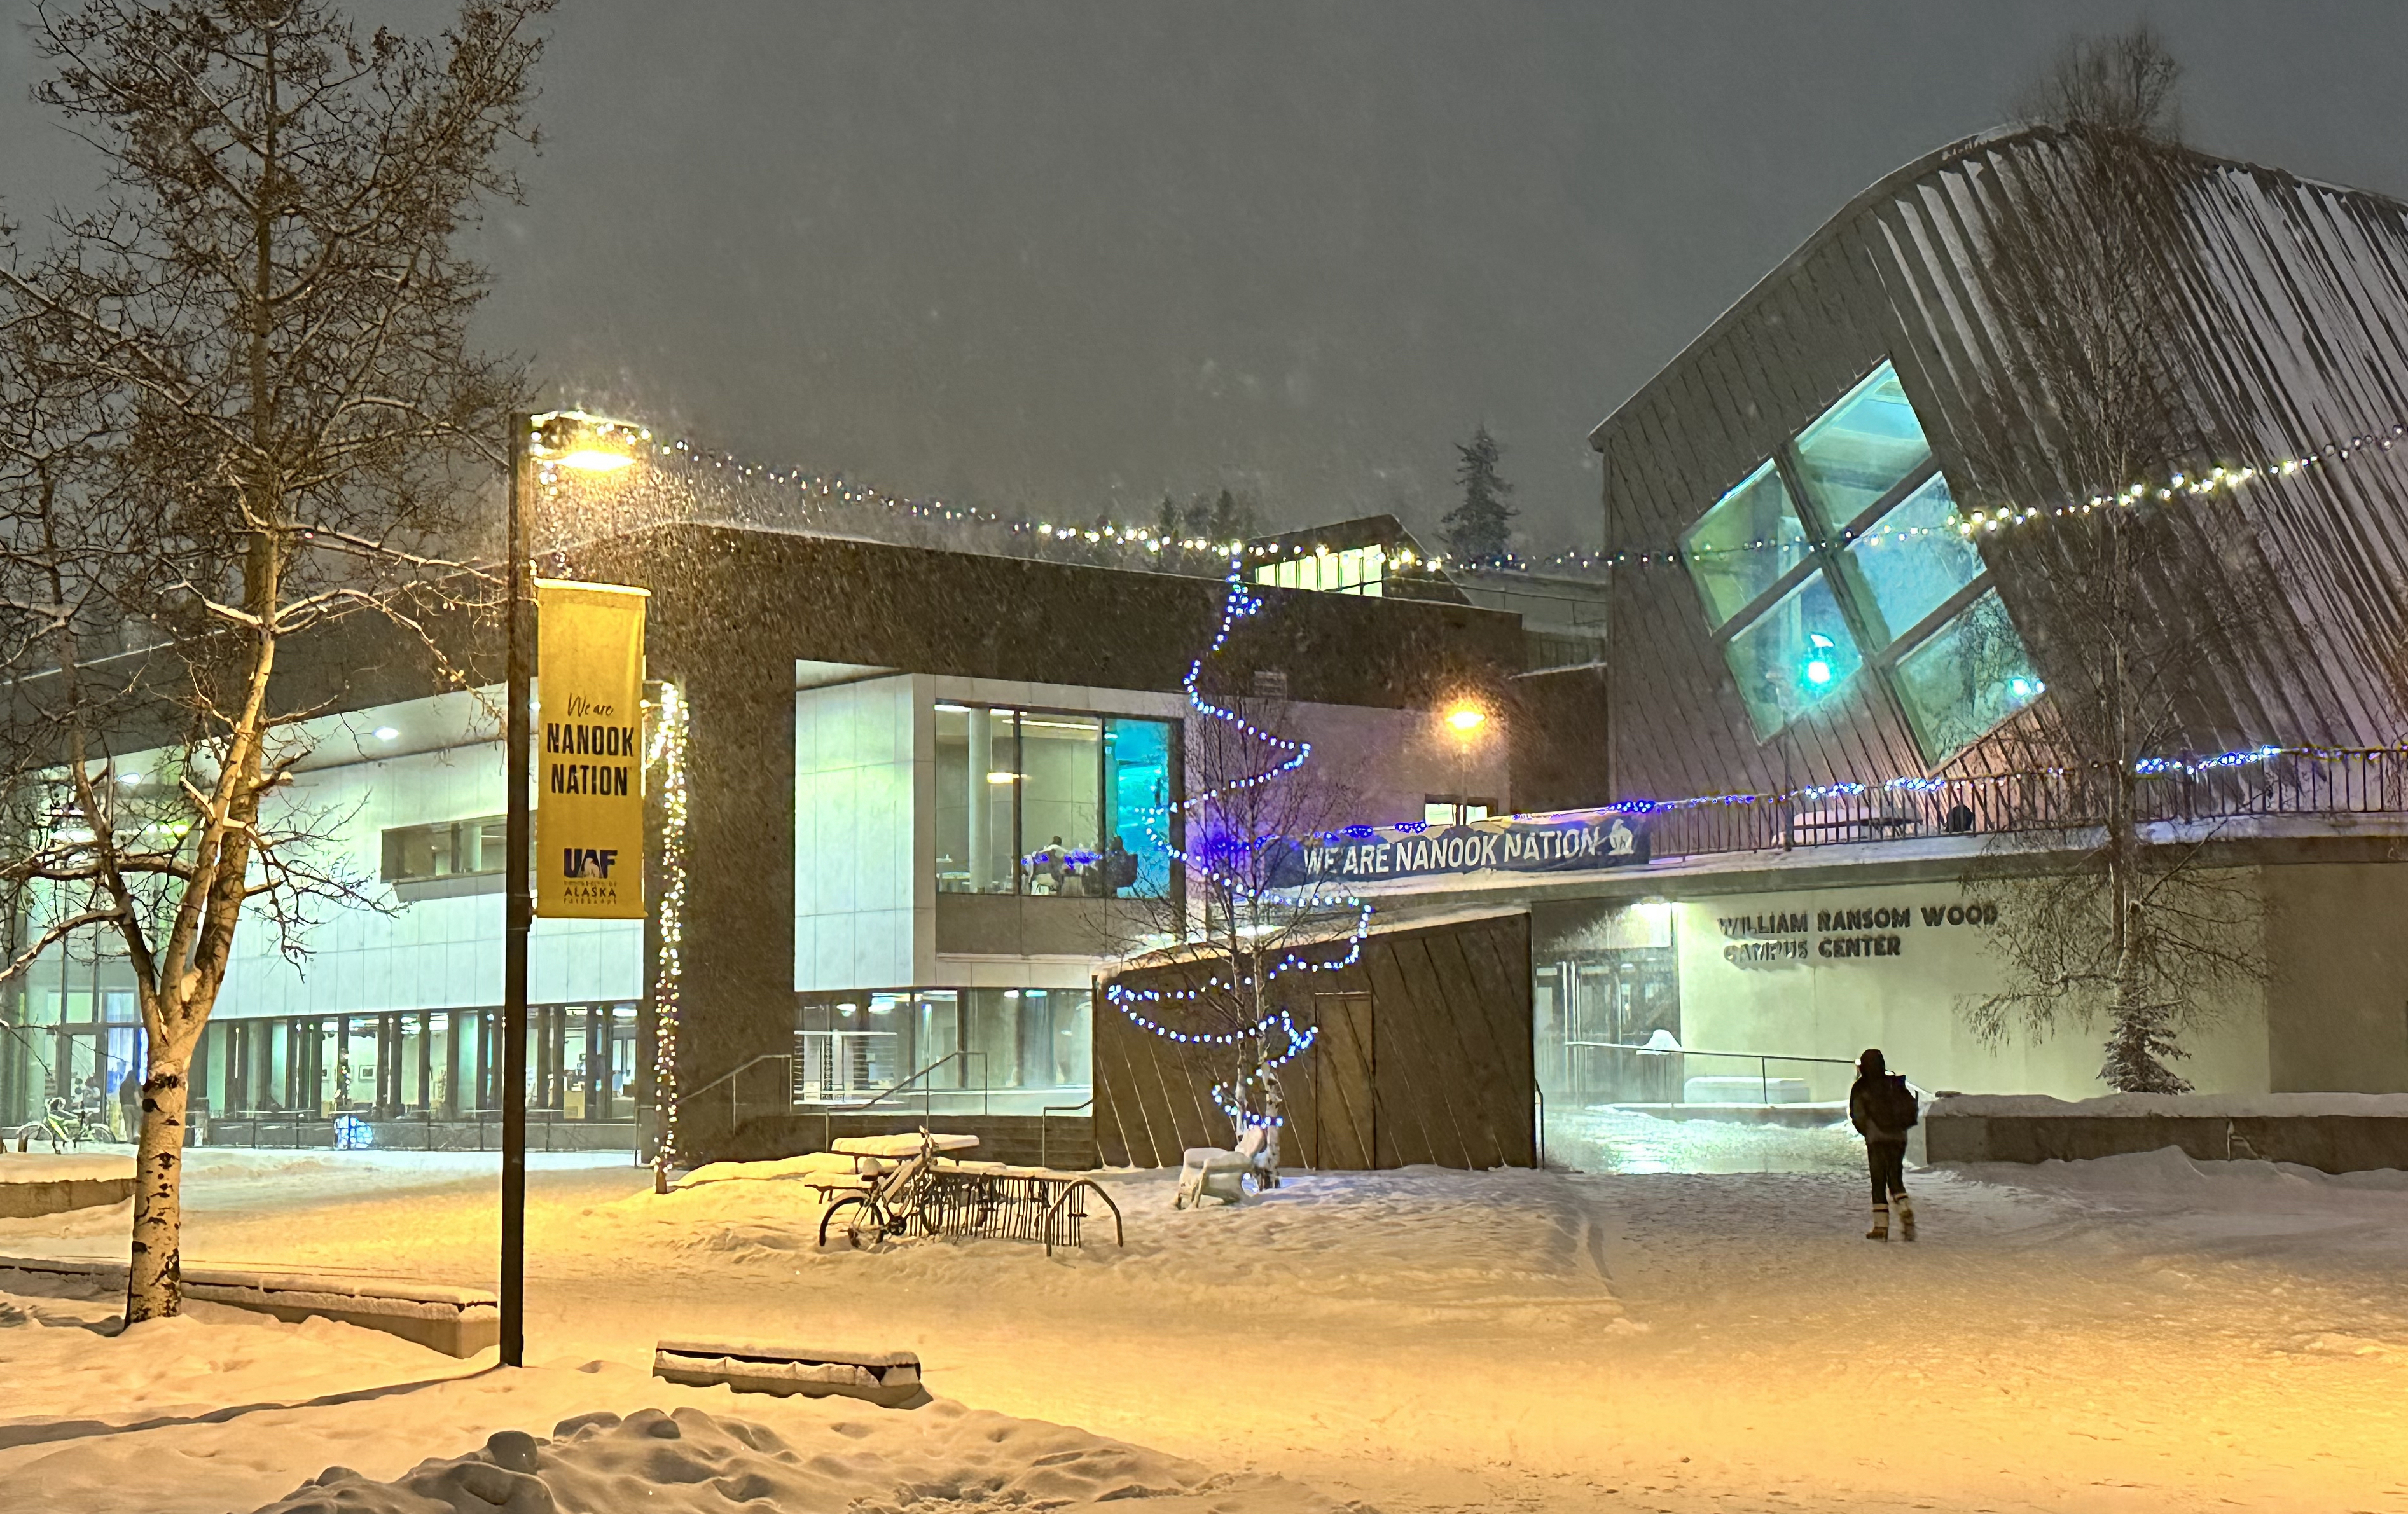 Most offices at the University of Alaska Fairbanks will close for the winter break from Dec. 23, 2023, to Jan. 2, 2024. Some offices will also close or have reduced hours Dec. 18-22 and Jan. 3-7.